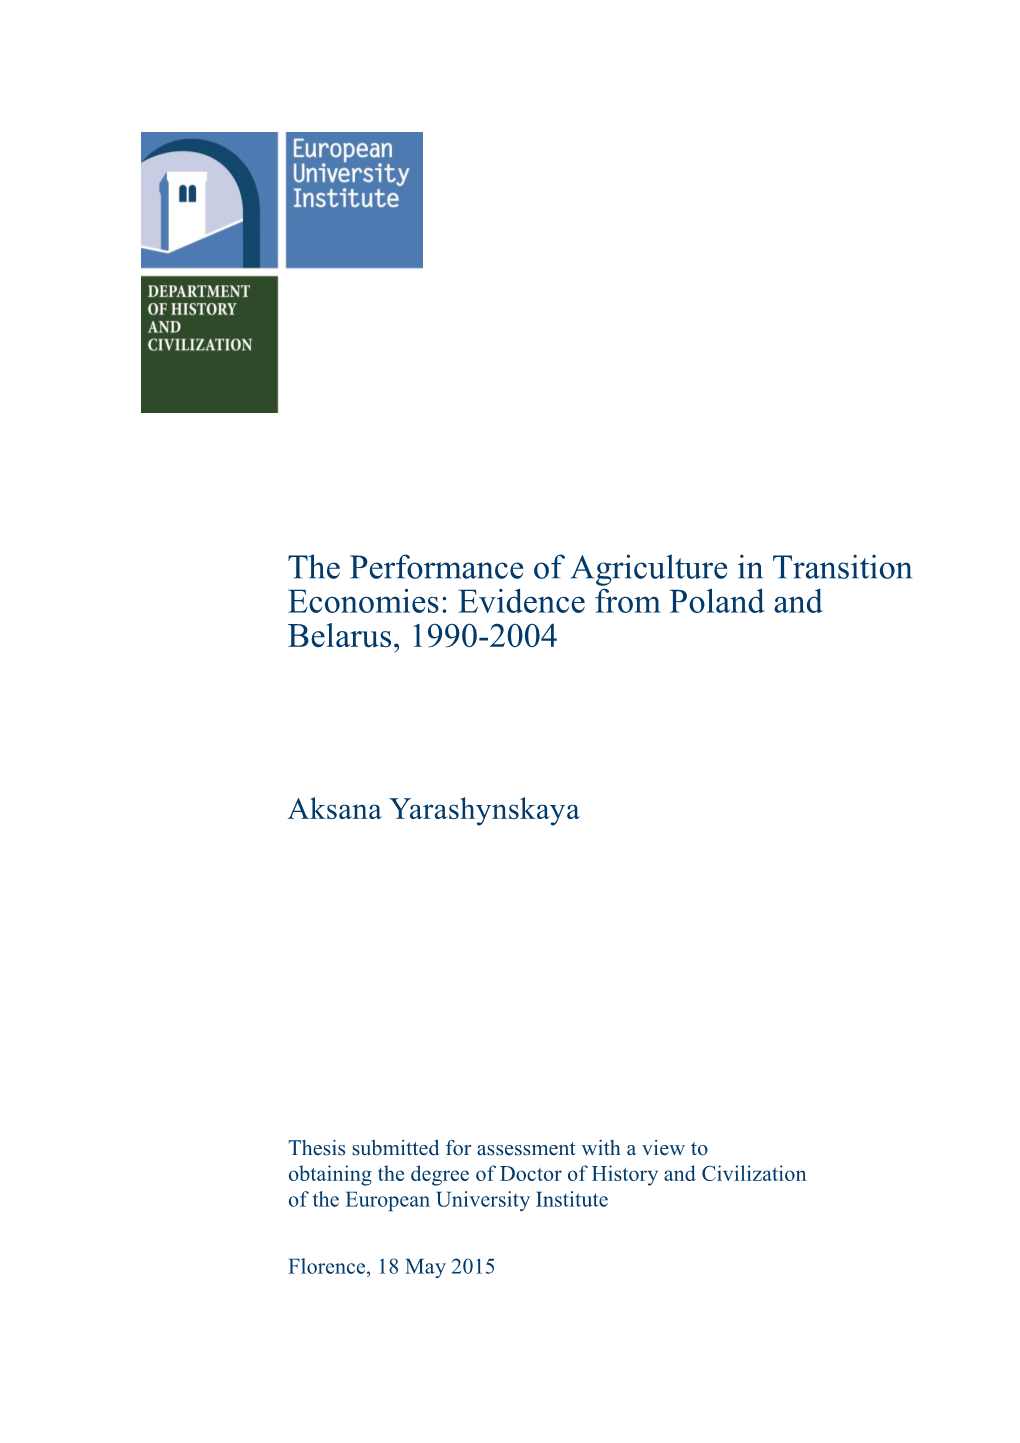 The Performance of Agriculture in Transition Economies: Evidence from Poland and Belarus, 1990-2004